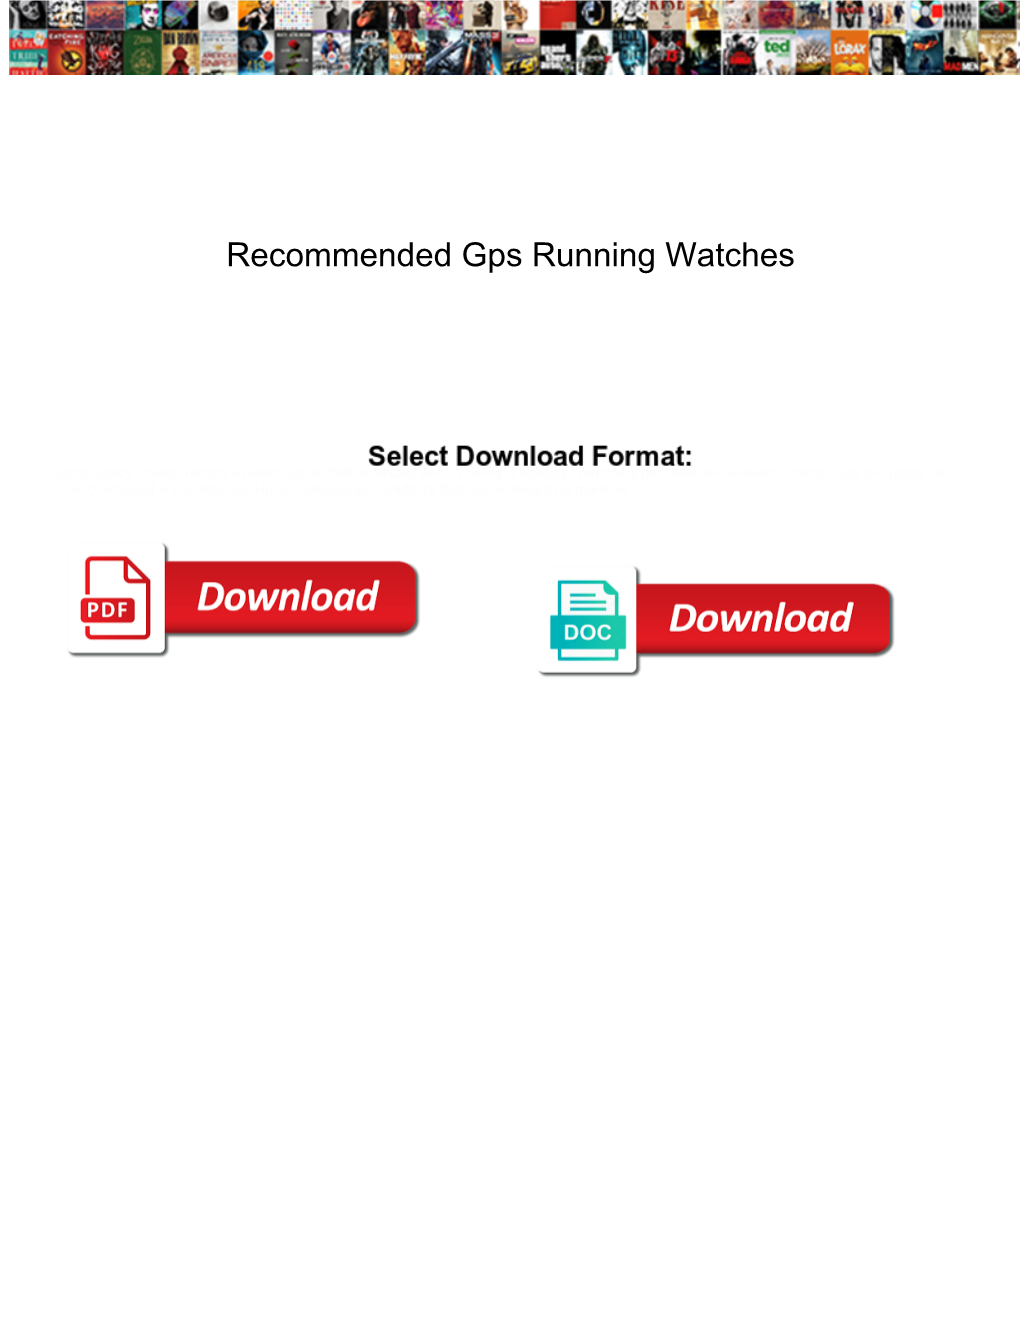 Recommended Gps Running Watches